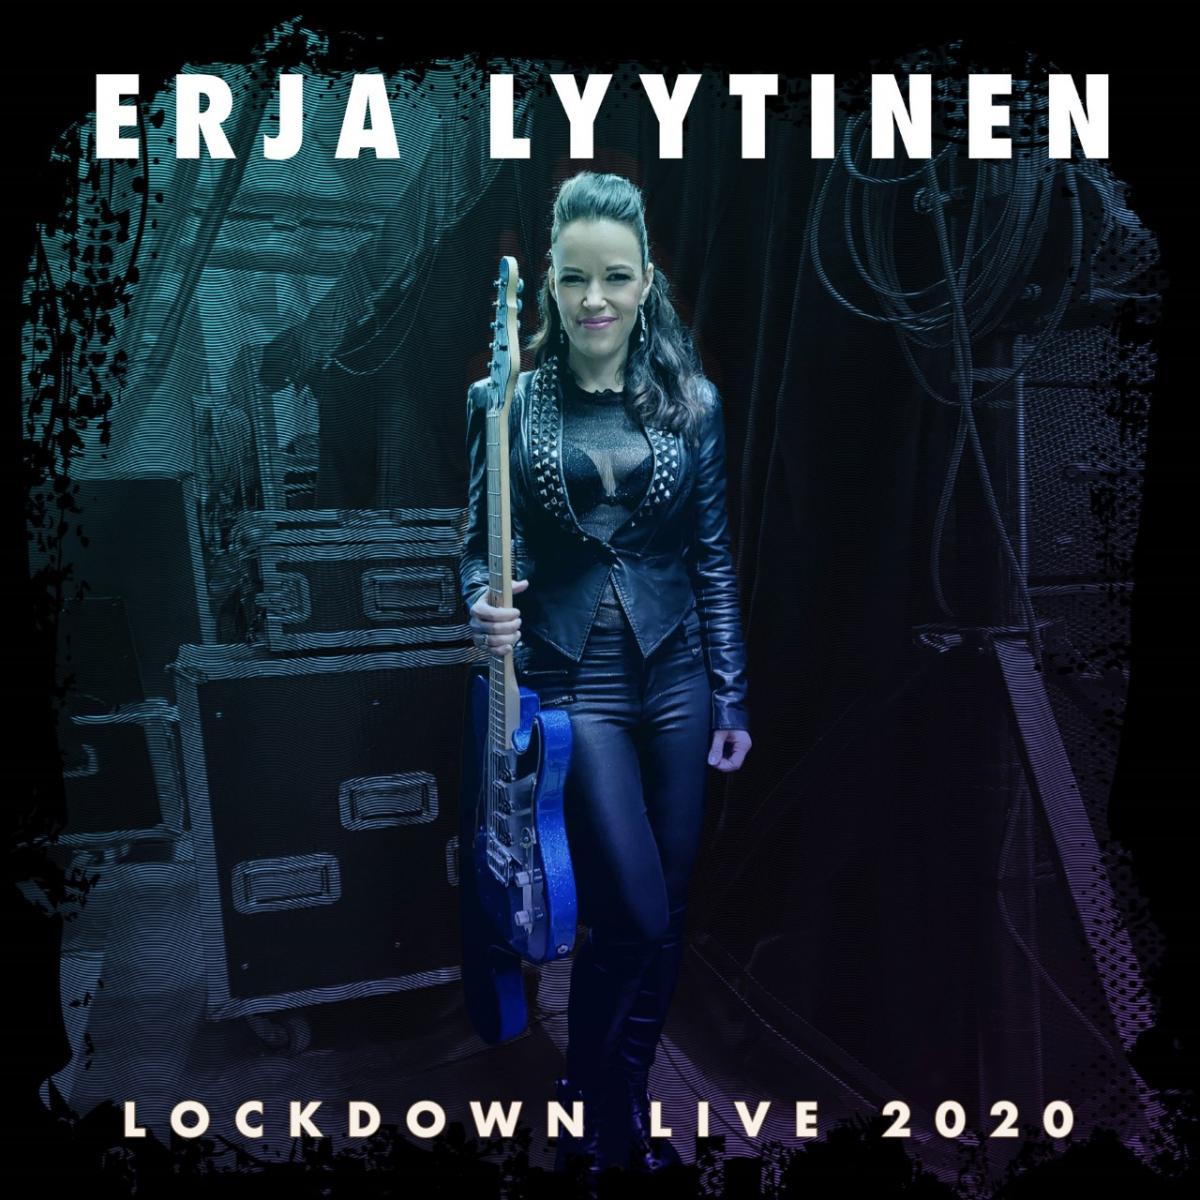 Erja Lyytinen to release live album CD and DVD package